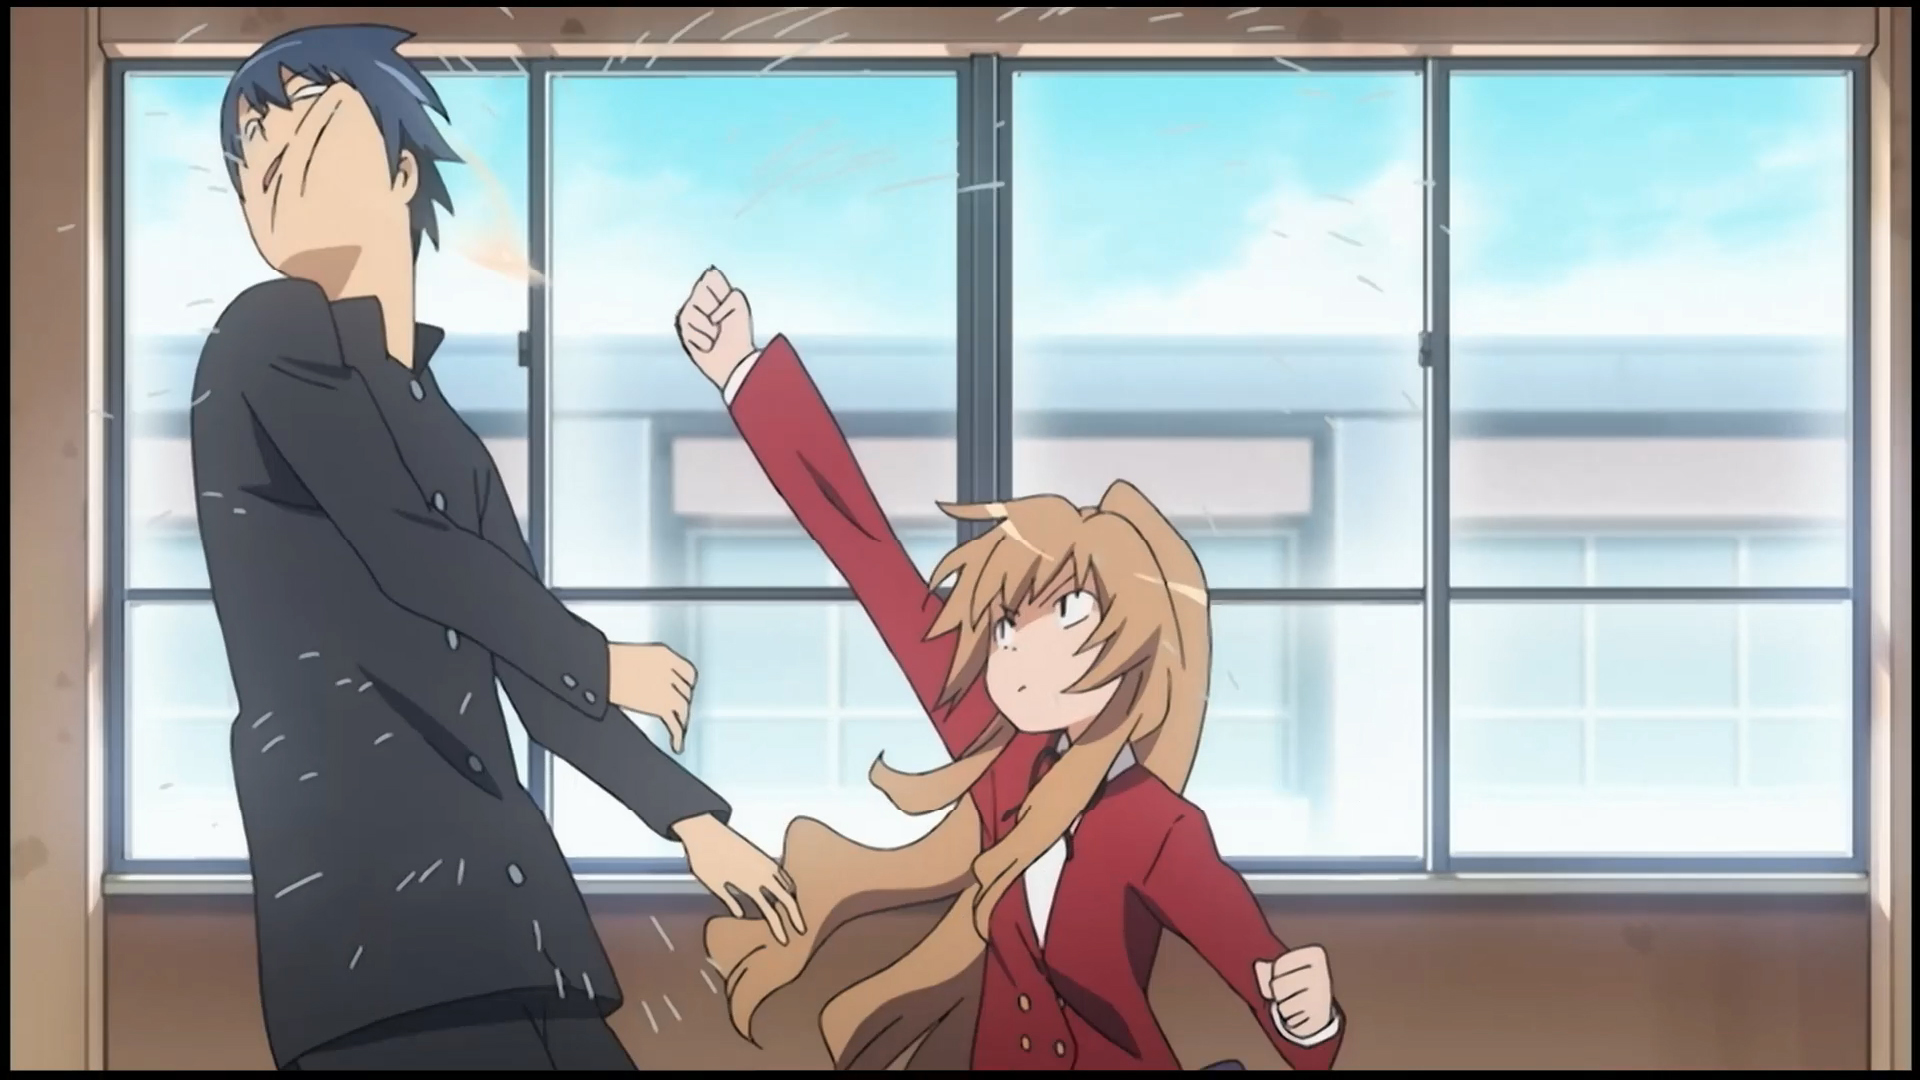 Toradora!: The 10 Best Characters, Ranked